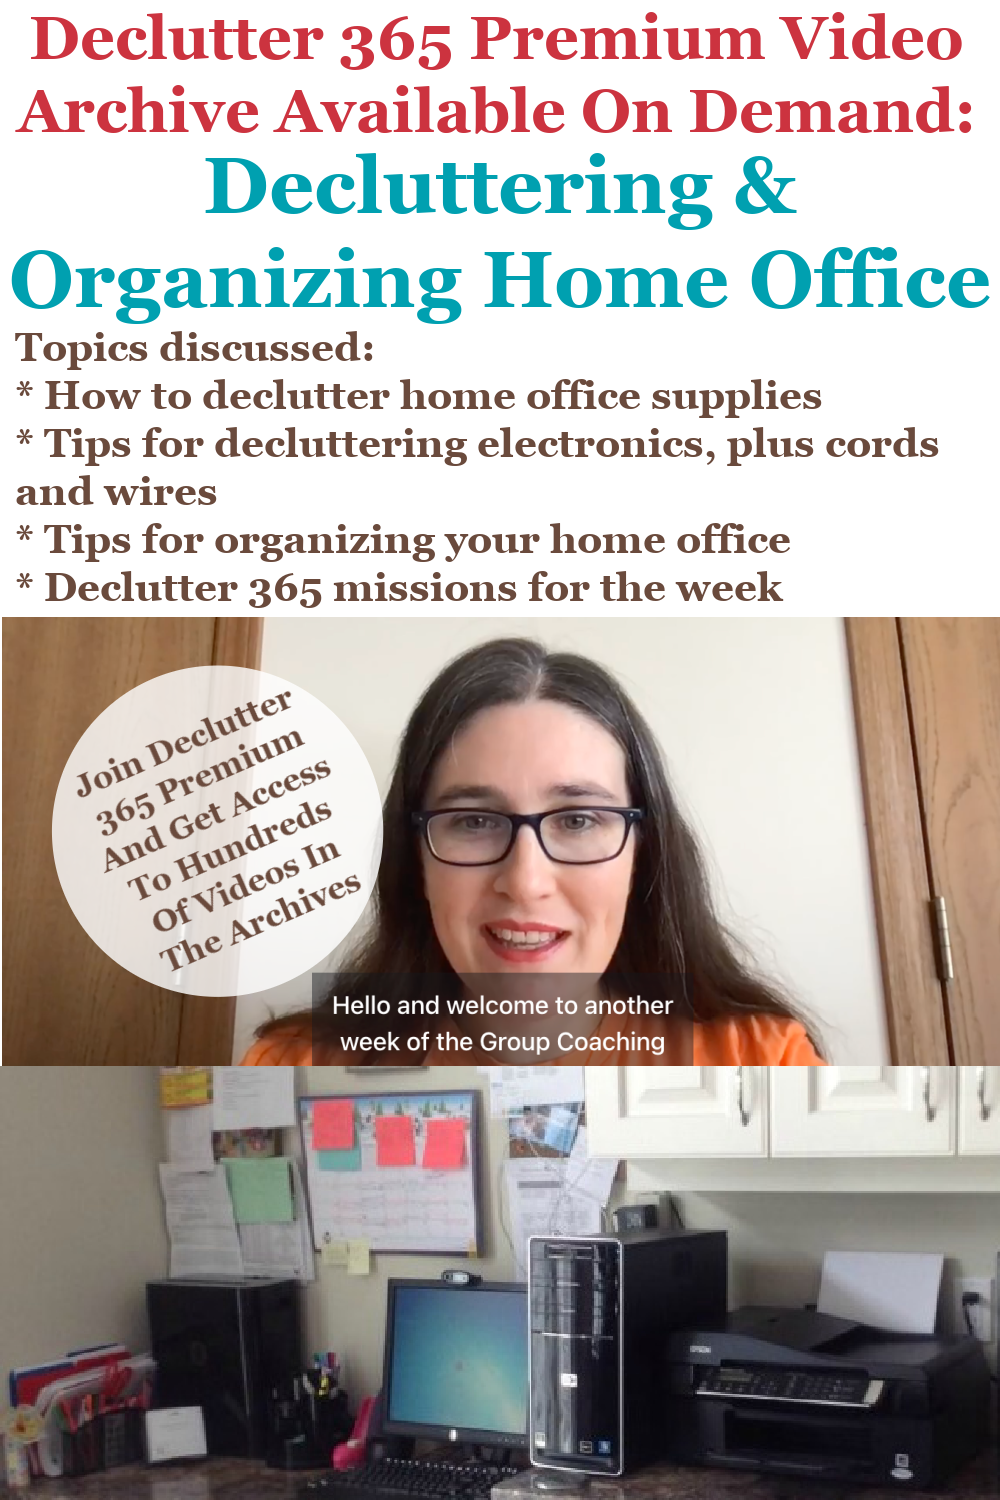 Declutter 365 Premium video archive available on demand all about decluttering and organizing your home office, on Home Storage Solutions 101